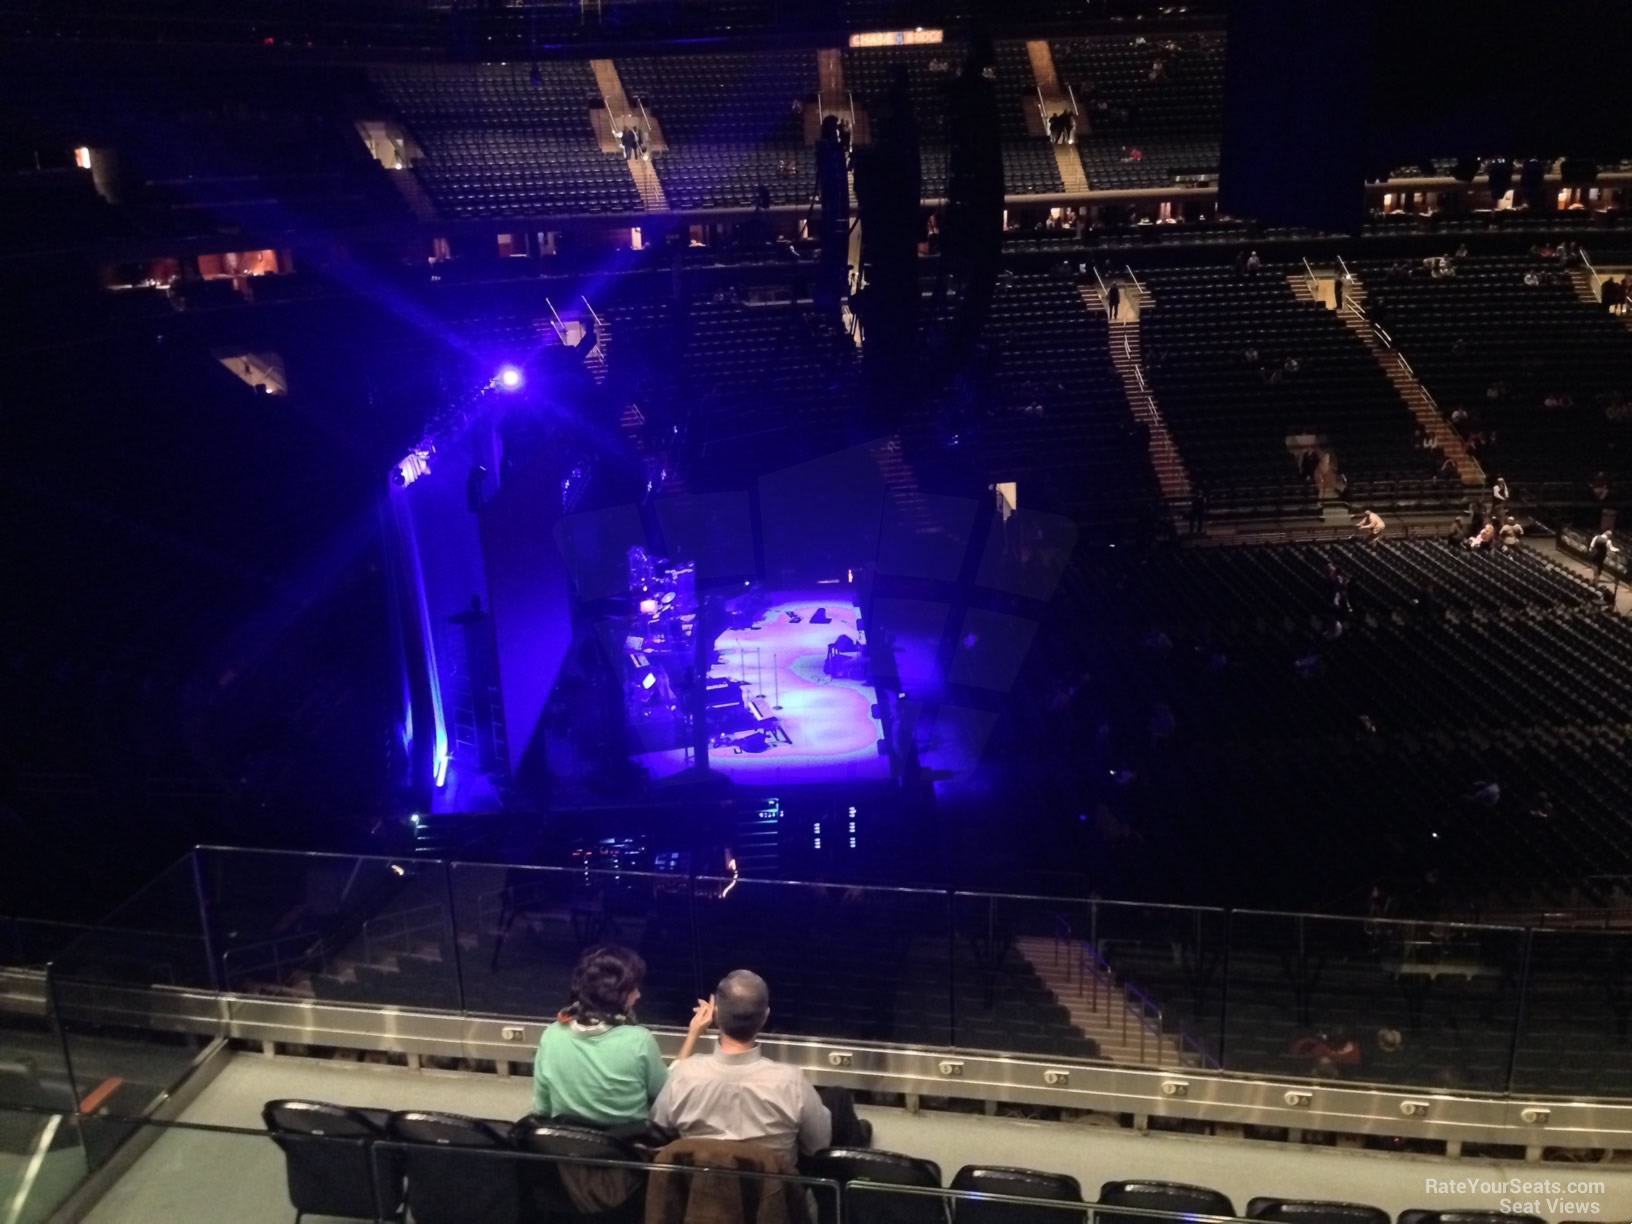 section 222, row 8 seat view  for concert - madison square garden